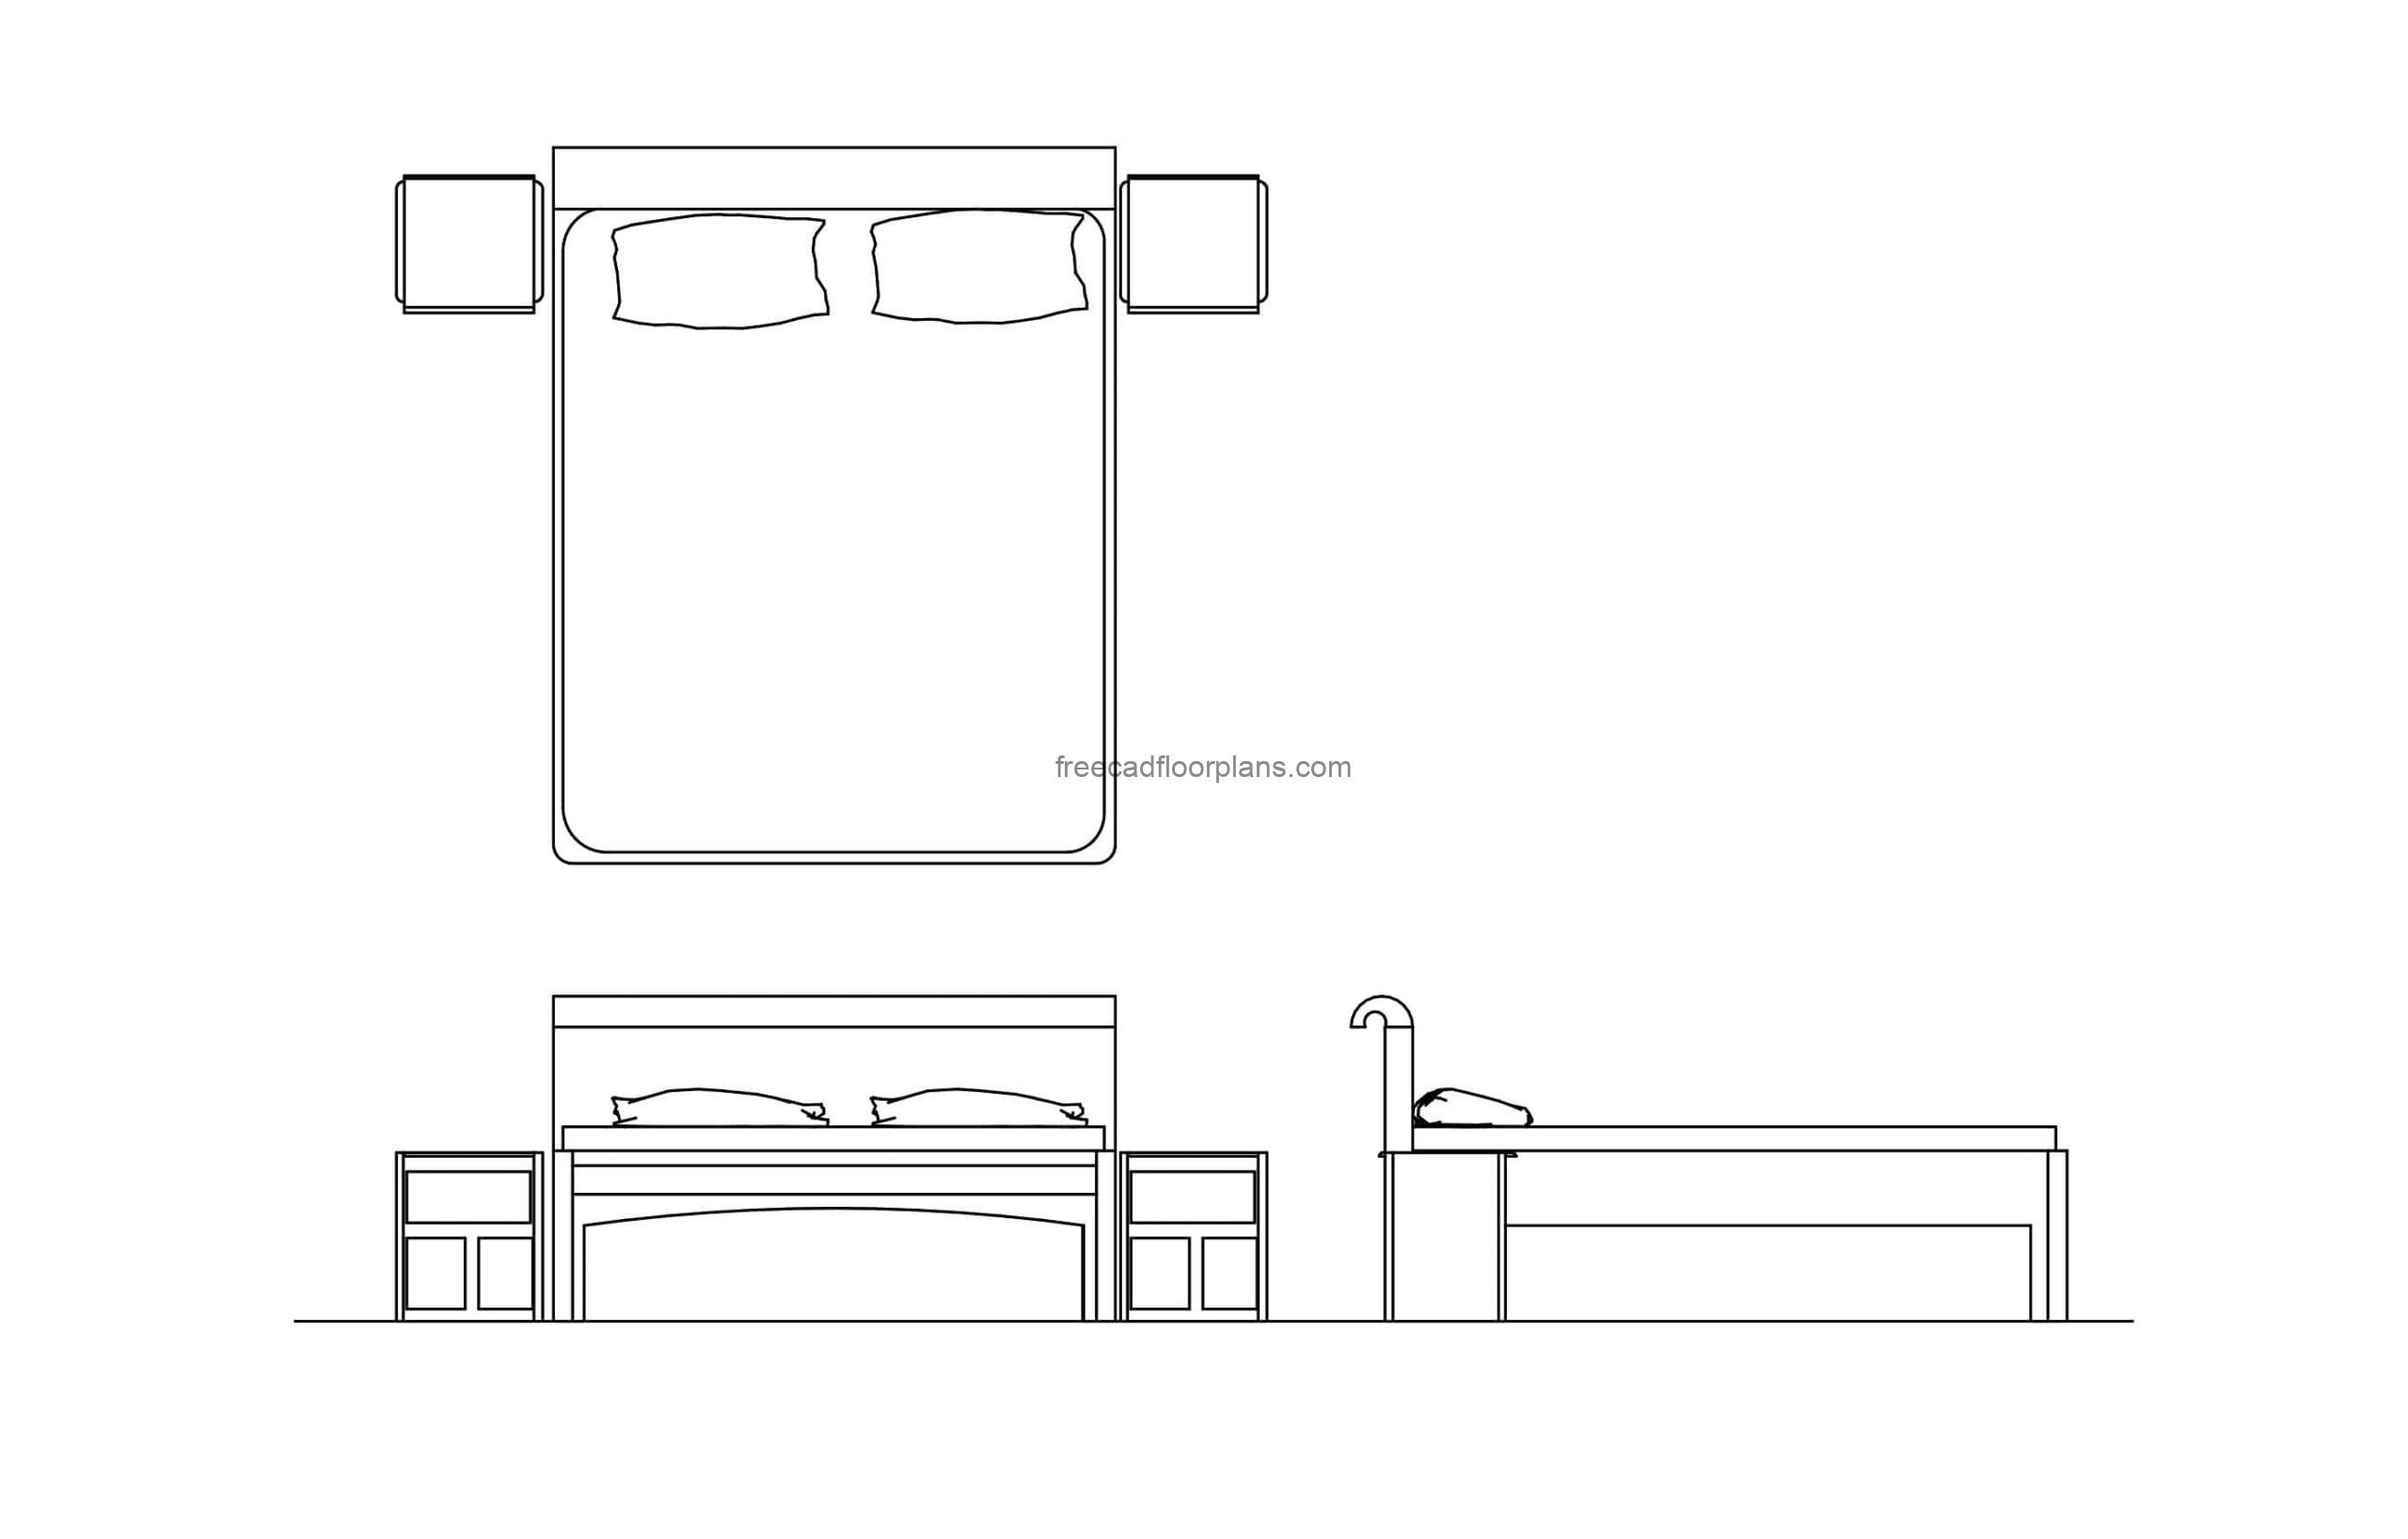 king size bed autocad drawing dwg cad block plan and elevations views for free download